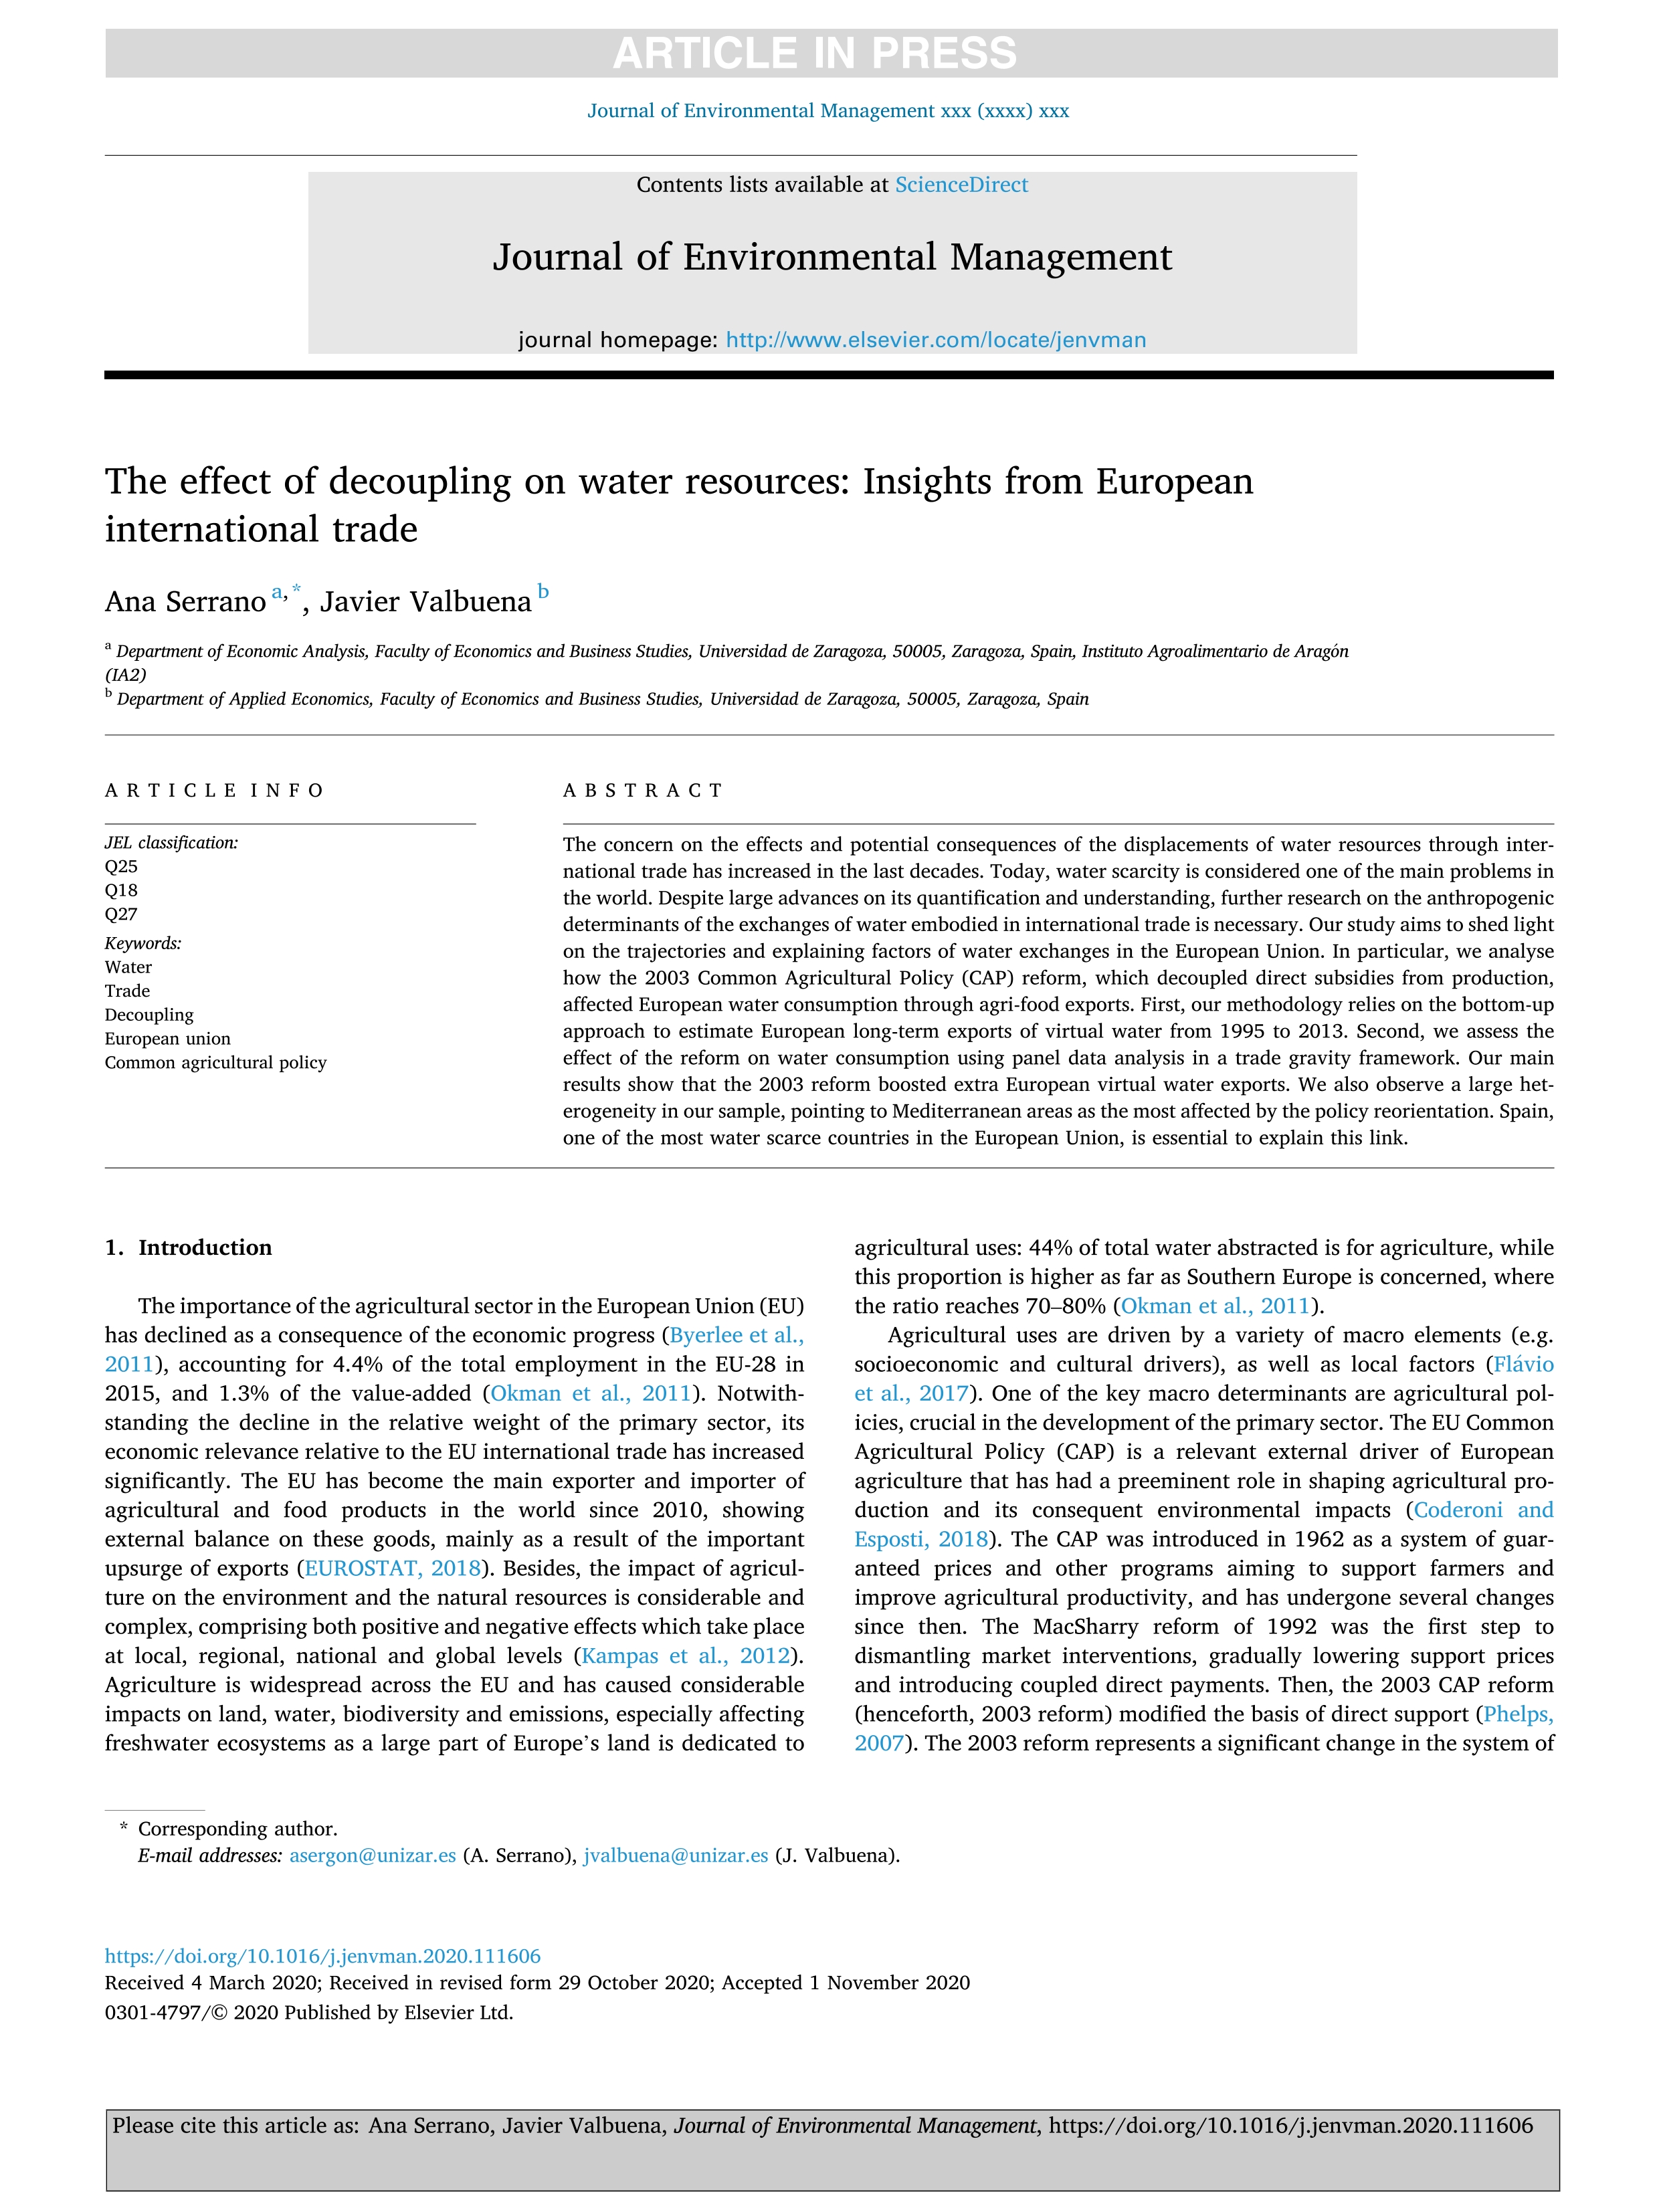 The effect of decoupling on water resources: Insights from European international trade